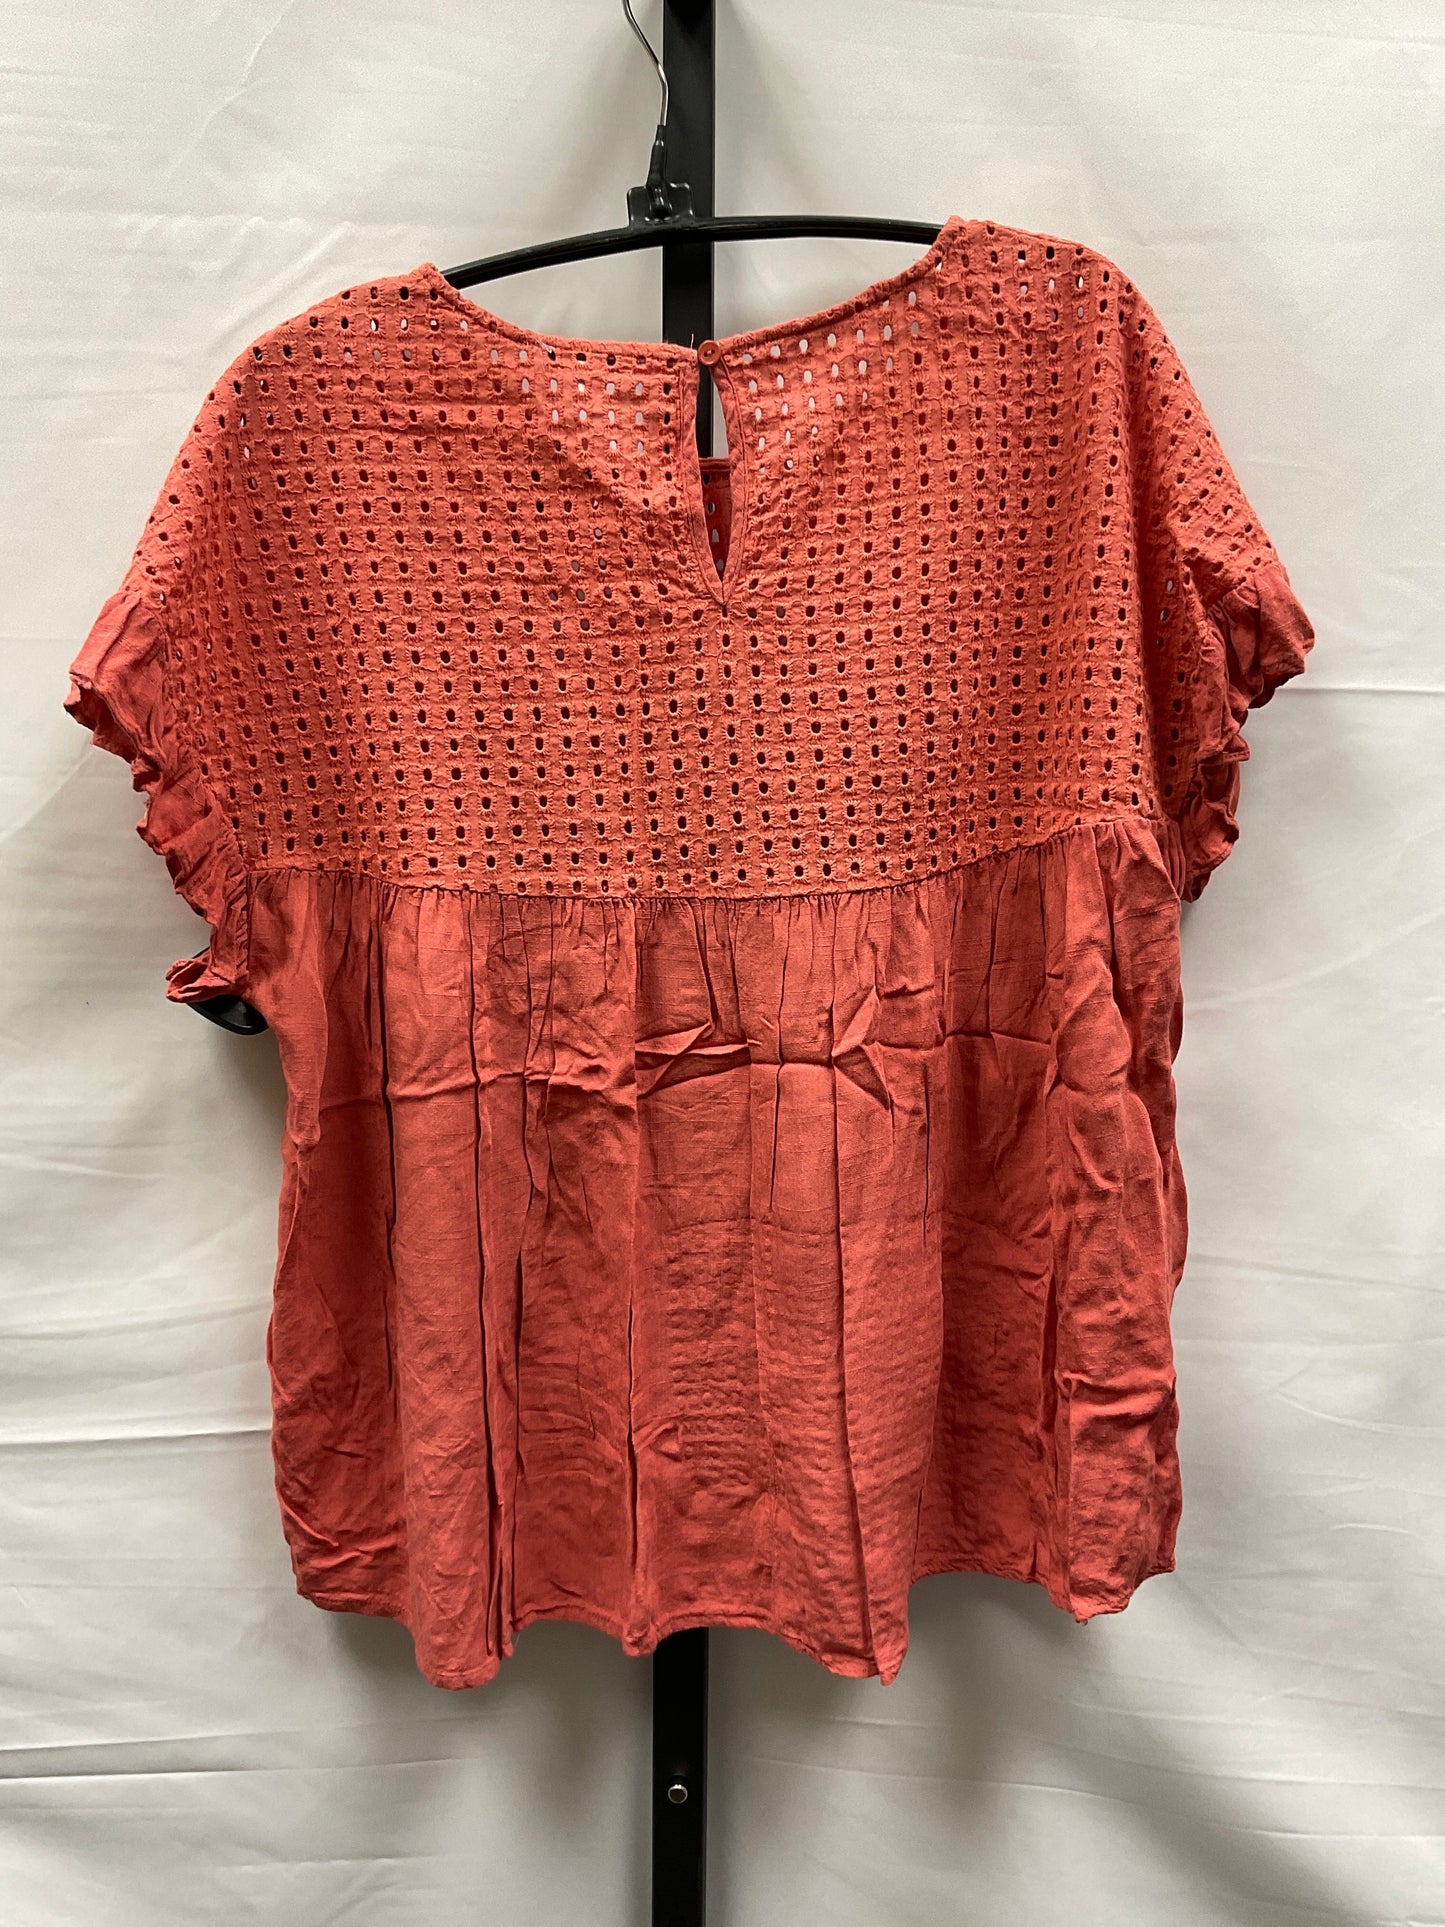 Red Top Short Sleeve Jodifl, Size M